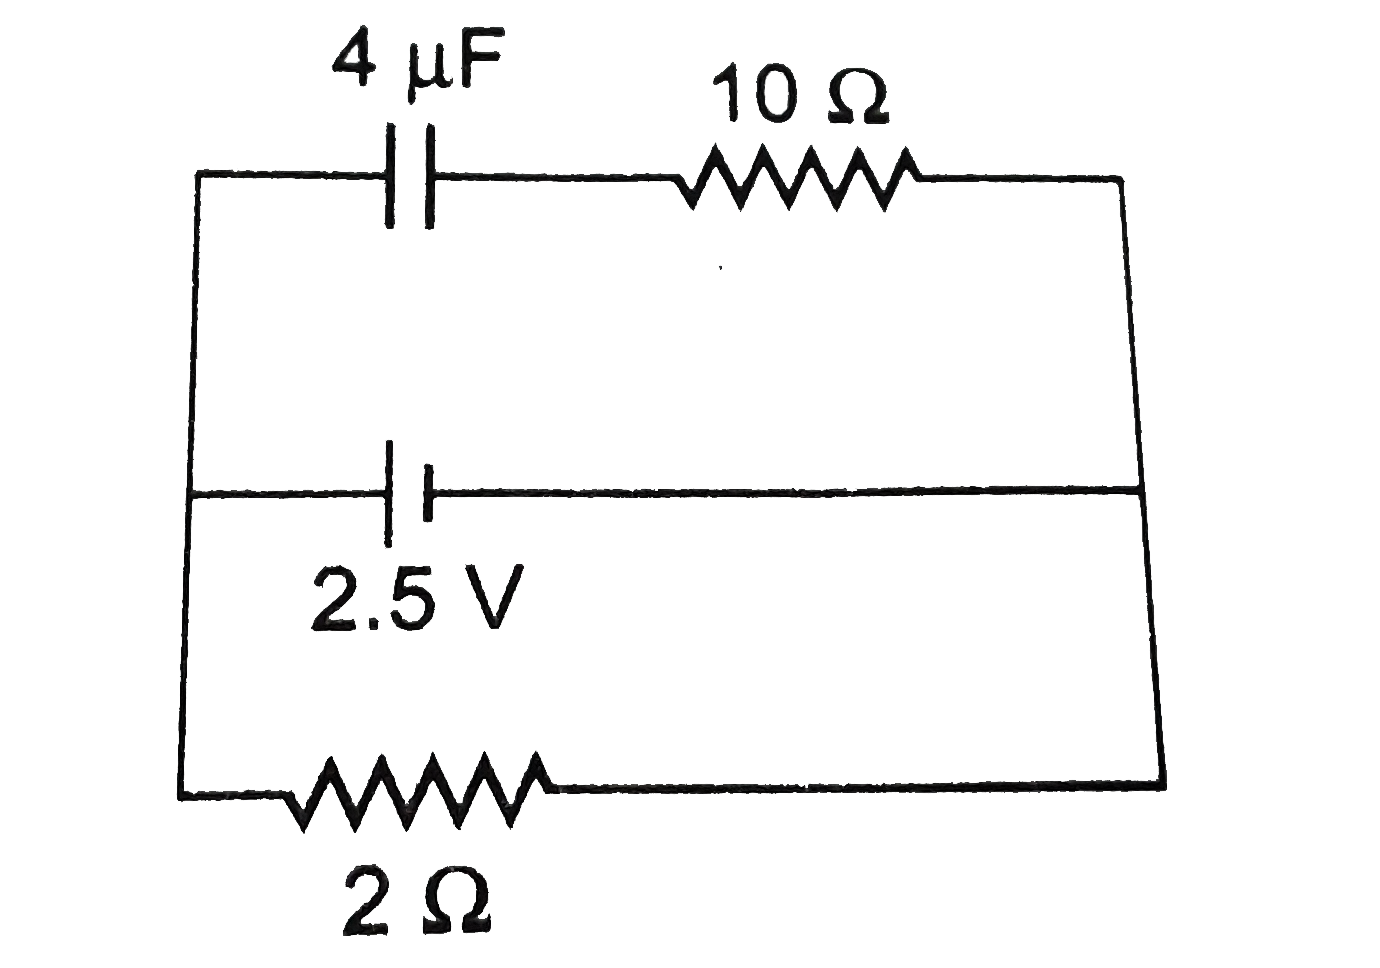 A capacitor of 4muF is connected as shwon in the figure. The internal resistance of the battery is 0.5Omega. The amount of charge on the capacitor plates will be